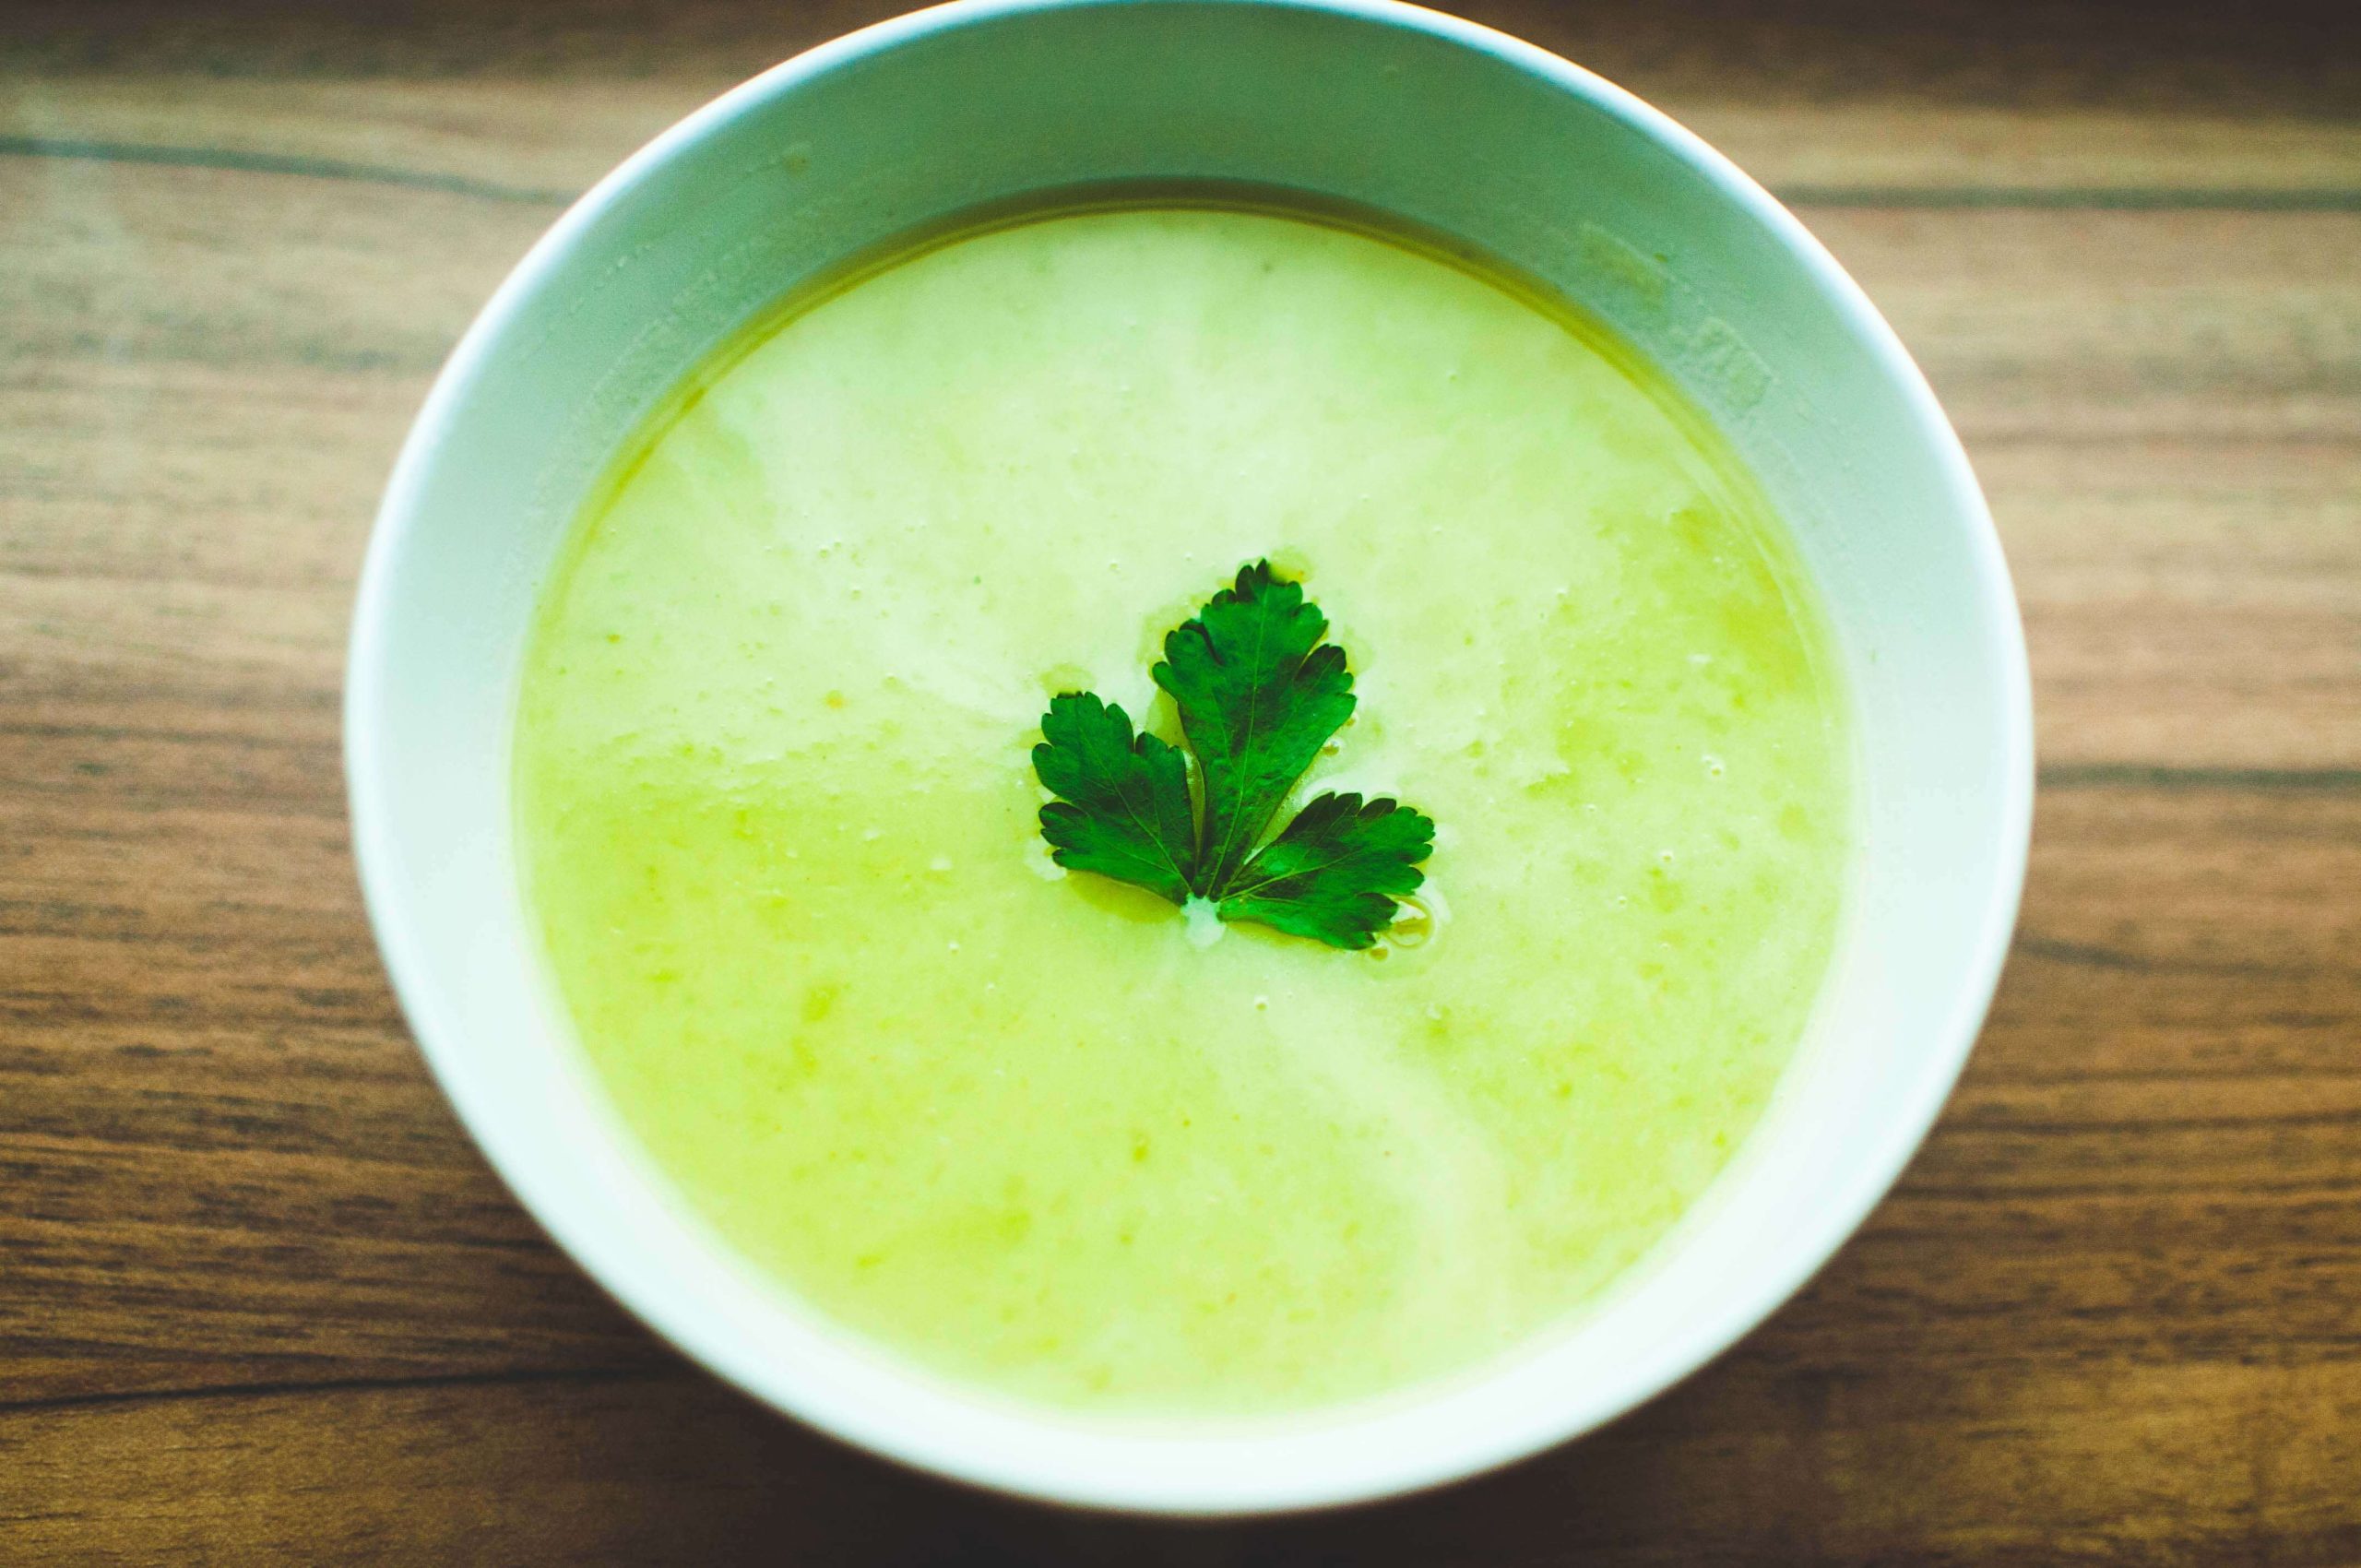 How Many Carbs In Cream Of Broccoli Soup?